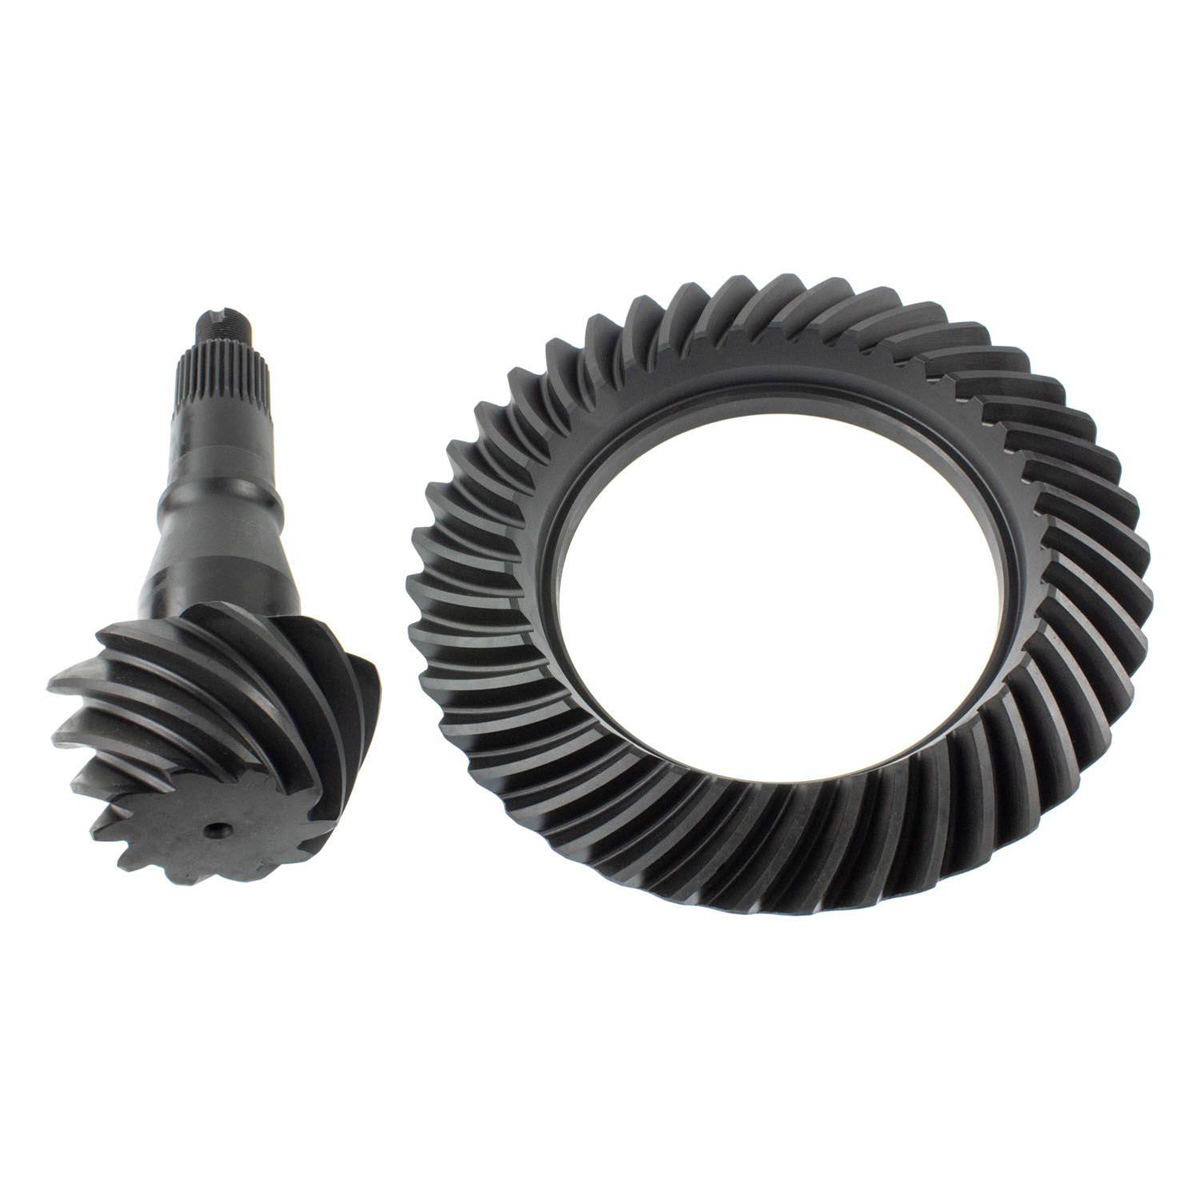 Motive Gear GM9.76-410 Ring and Pinion, Performance, 4.10 Ratio, 32 Spline Pinion, 9.76 in, GM 12-Bolt, Kit